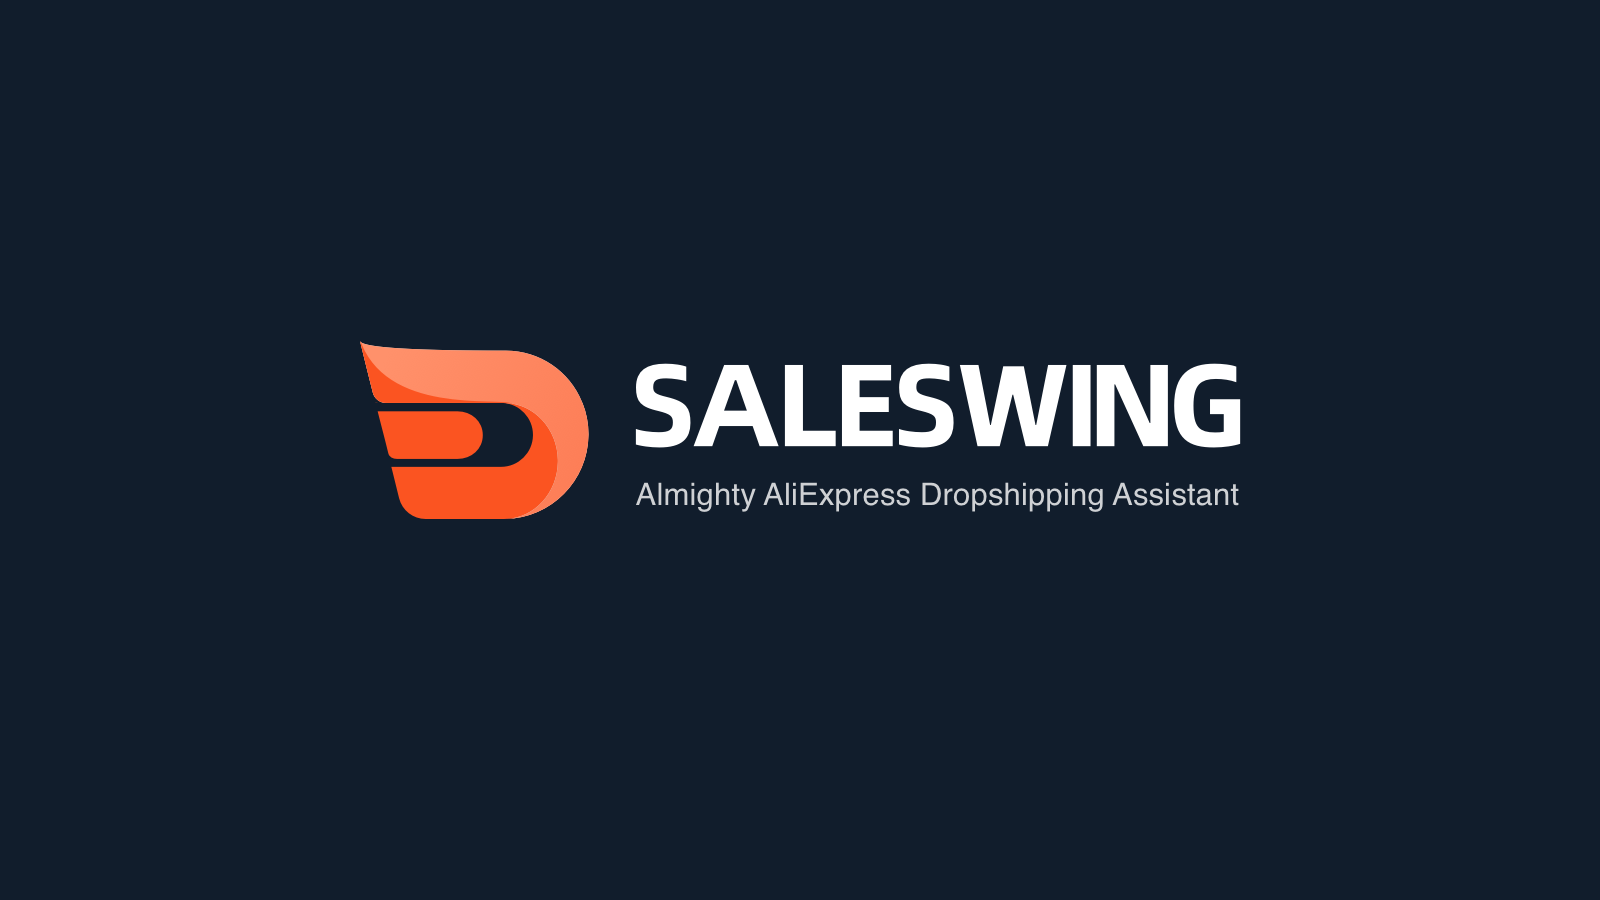 SALESWING - Almighty AliExpress dropshipping assistent